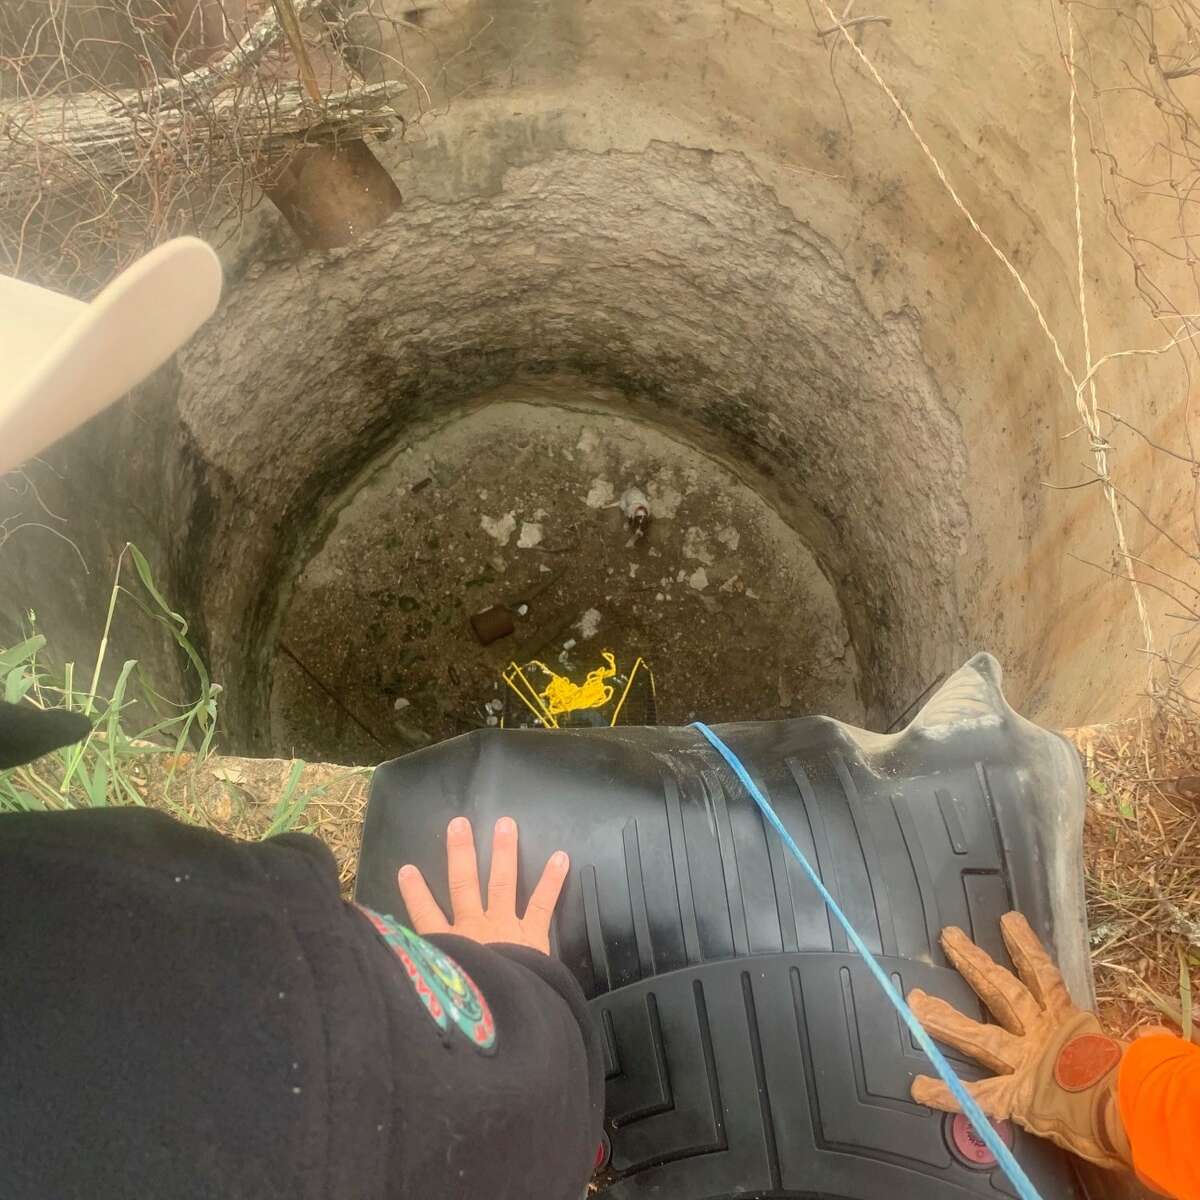 Texas Game Wardens recently rescued a dog trapped in an abandoned grain silo-turned well 50 feet below in Jim Hogg County, which is in South Texas near Laredo.  